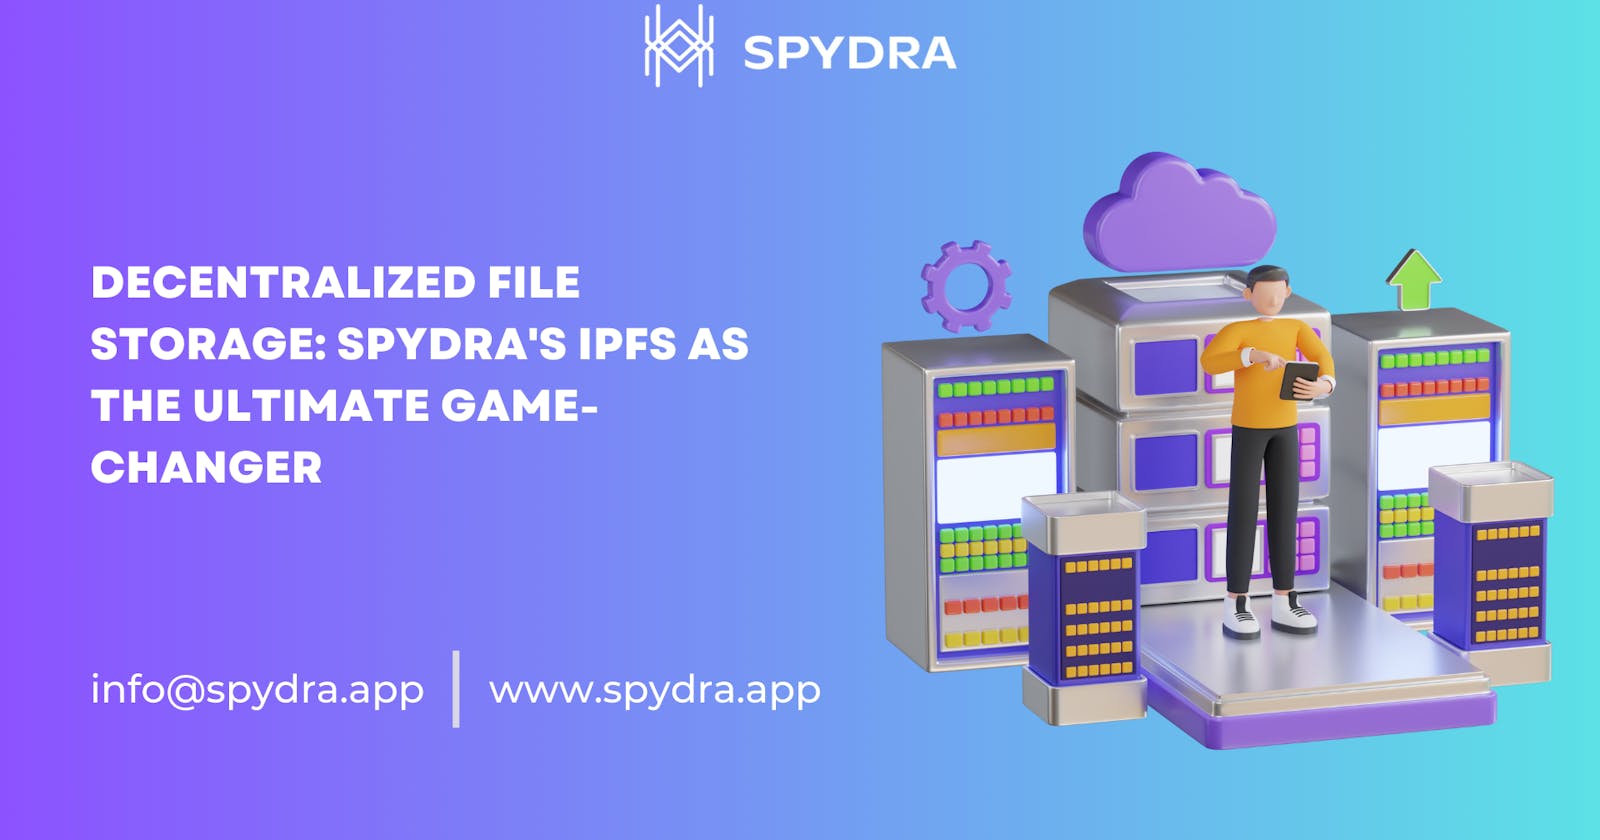 Decentralized File Storage: Spydra's IPFS as the Ultimate Game-Changer